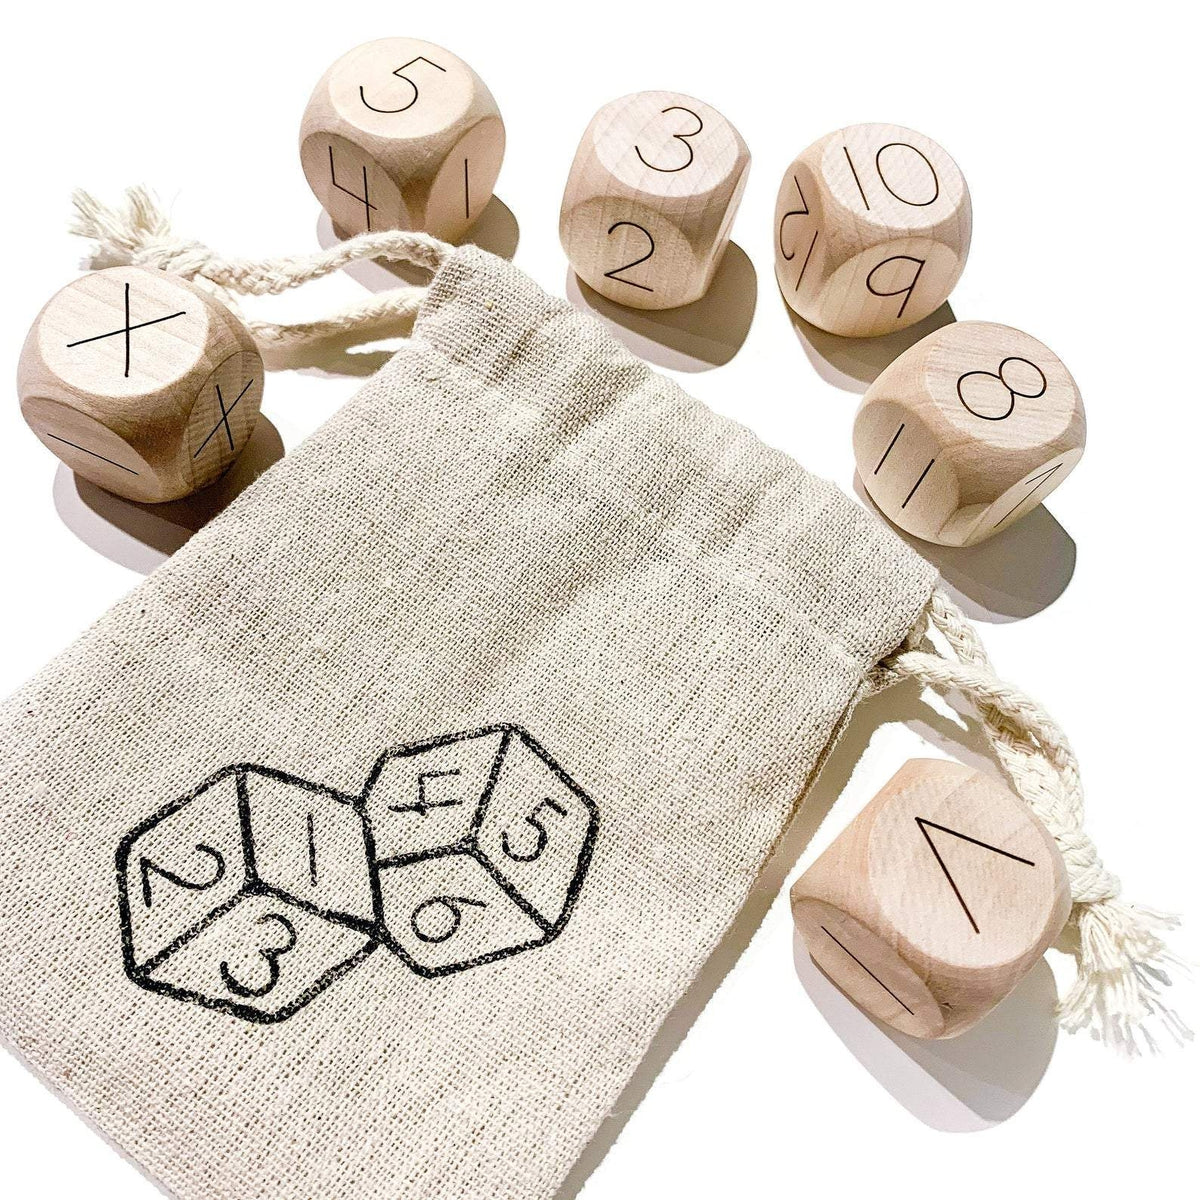 yoga dice – Dilly Dally Kids